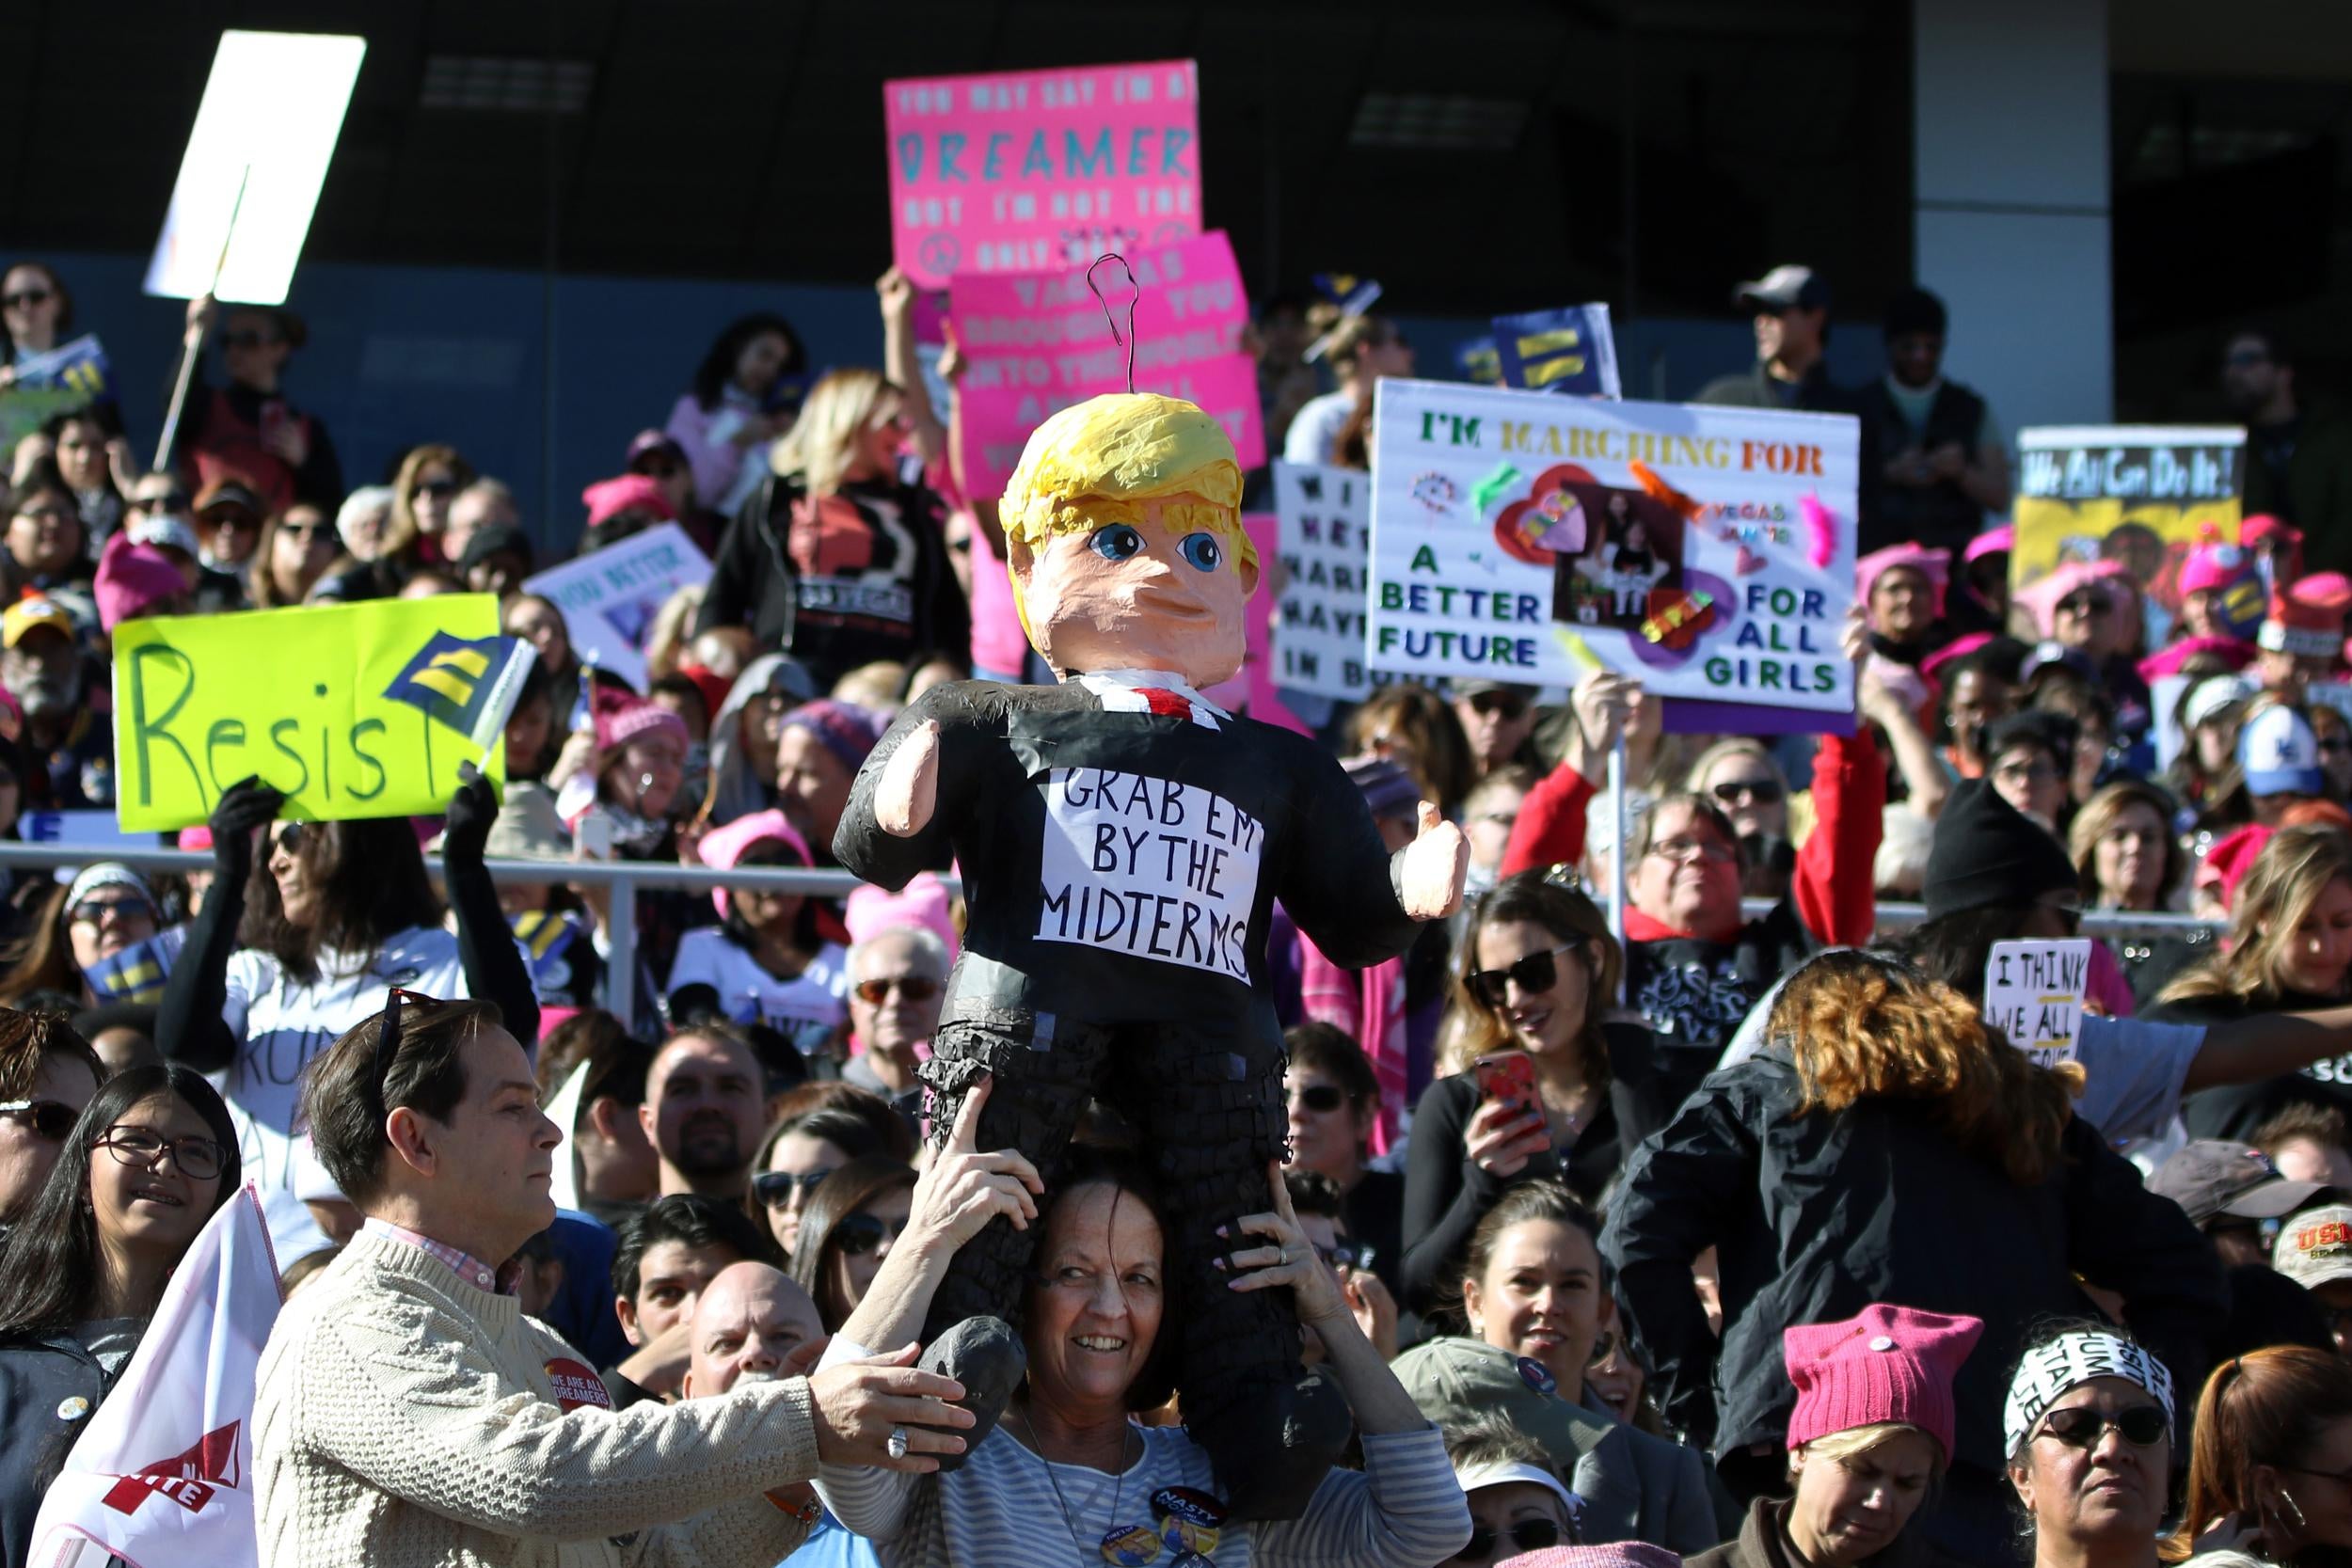 Participants, one with a US President Donald Trump figure, stand strong and applaud with their signs during the Women's March Anniversary 'Power To The Polls' event, January 21, 2018 at Sam Boyd Stadium in Las Vegas, Nevada.The rally is aimed at starting a national campaign to register voters, increase support for women and secure progressive seats in the upcoming midterm elections.